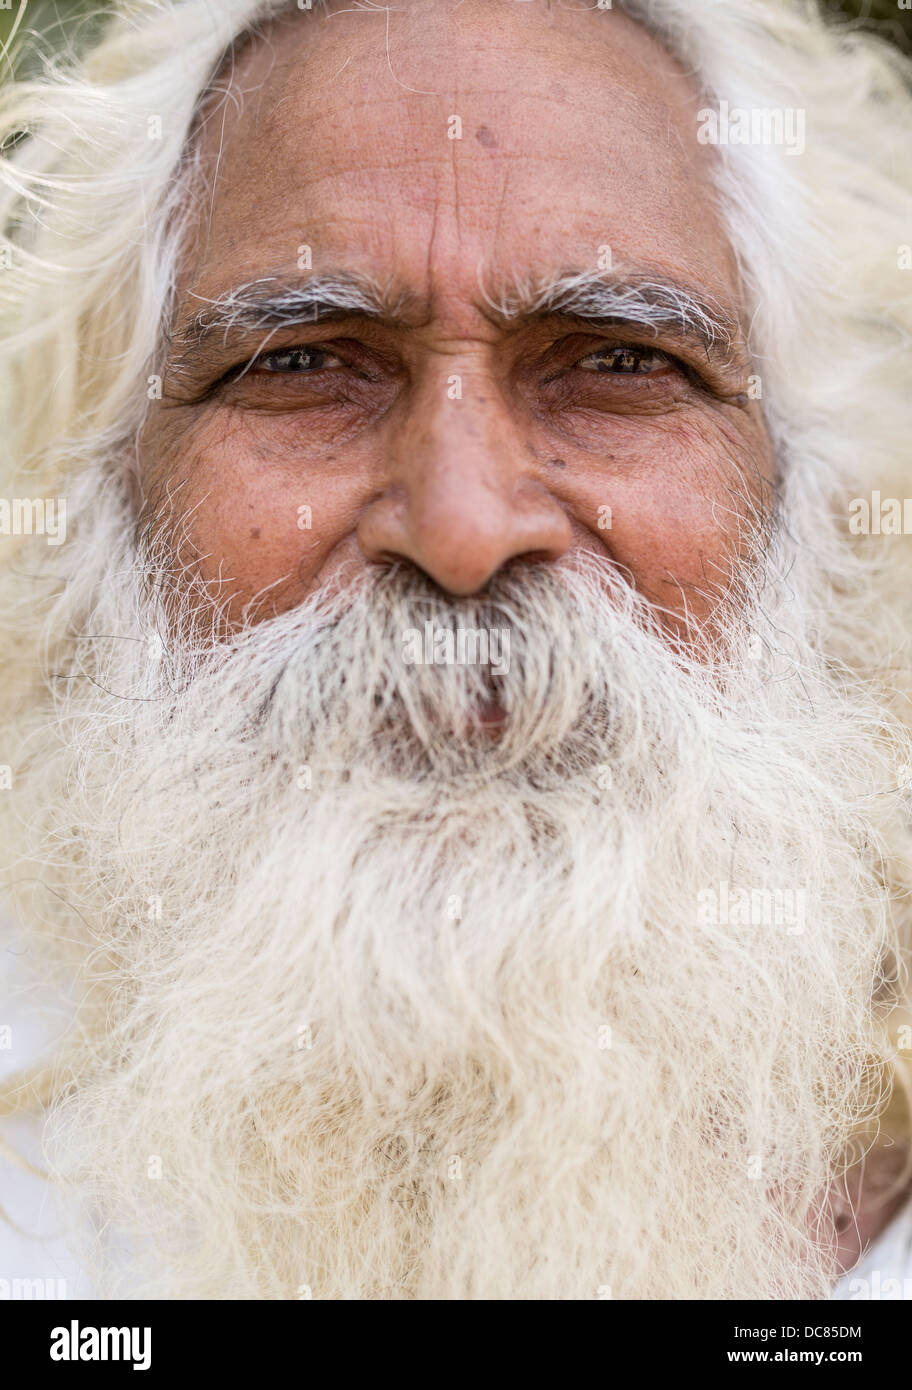 Portrait of elderly Indian man with large white beard and mustache in Varanasi India Stock Photo